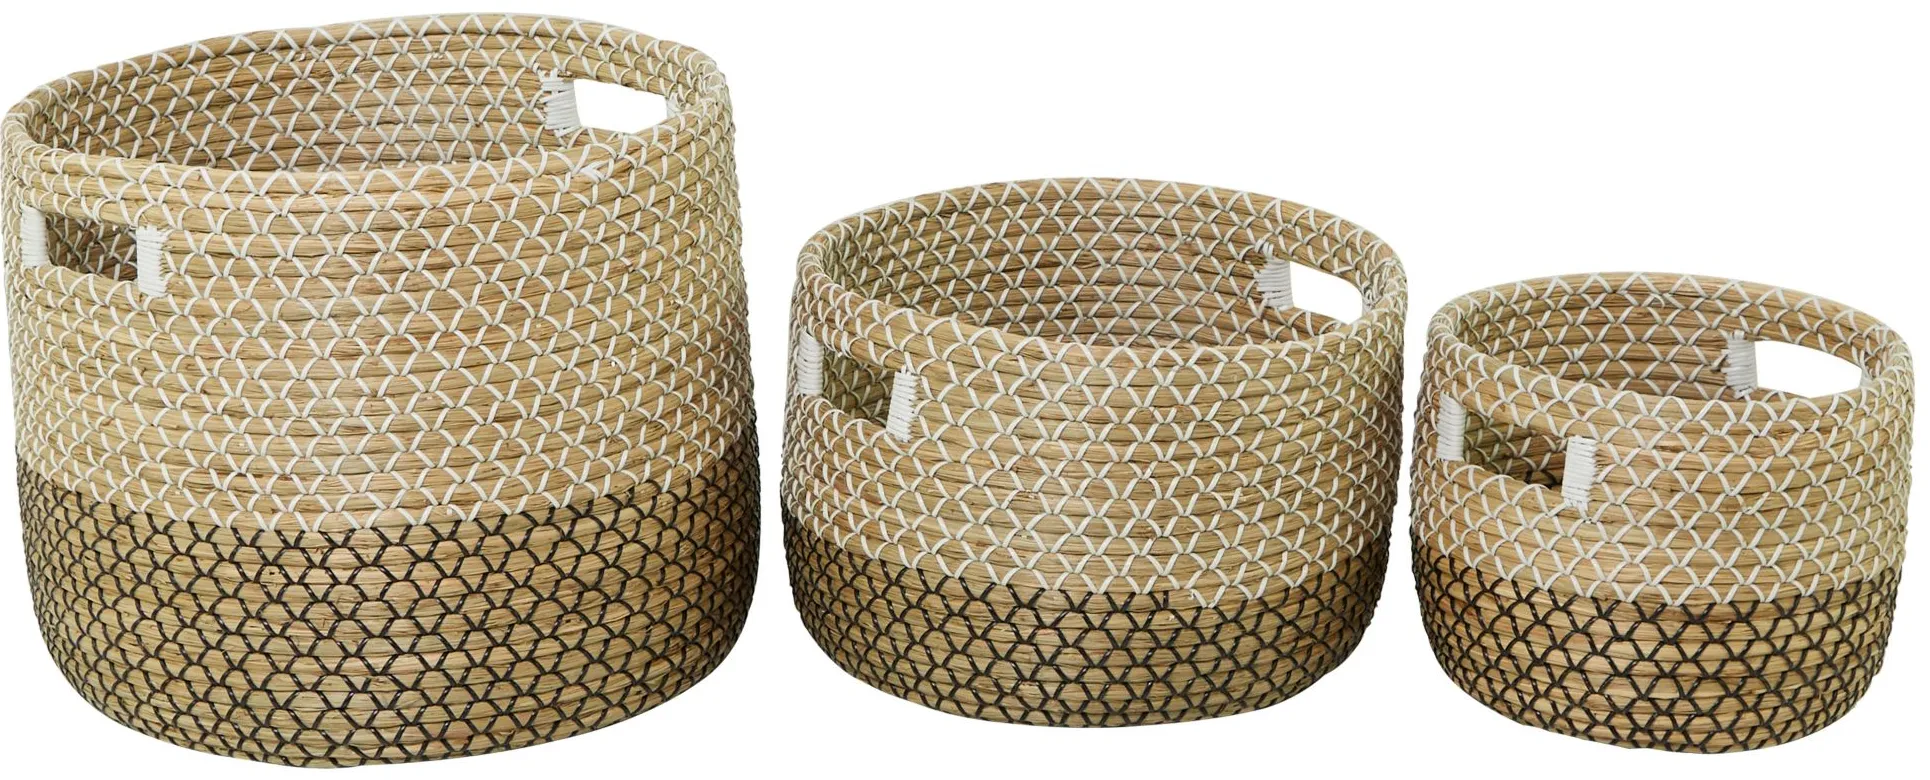 Ivy Collection Seagrass Storage Baskets - Set of 3 in Brown by UMA Enterprises